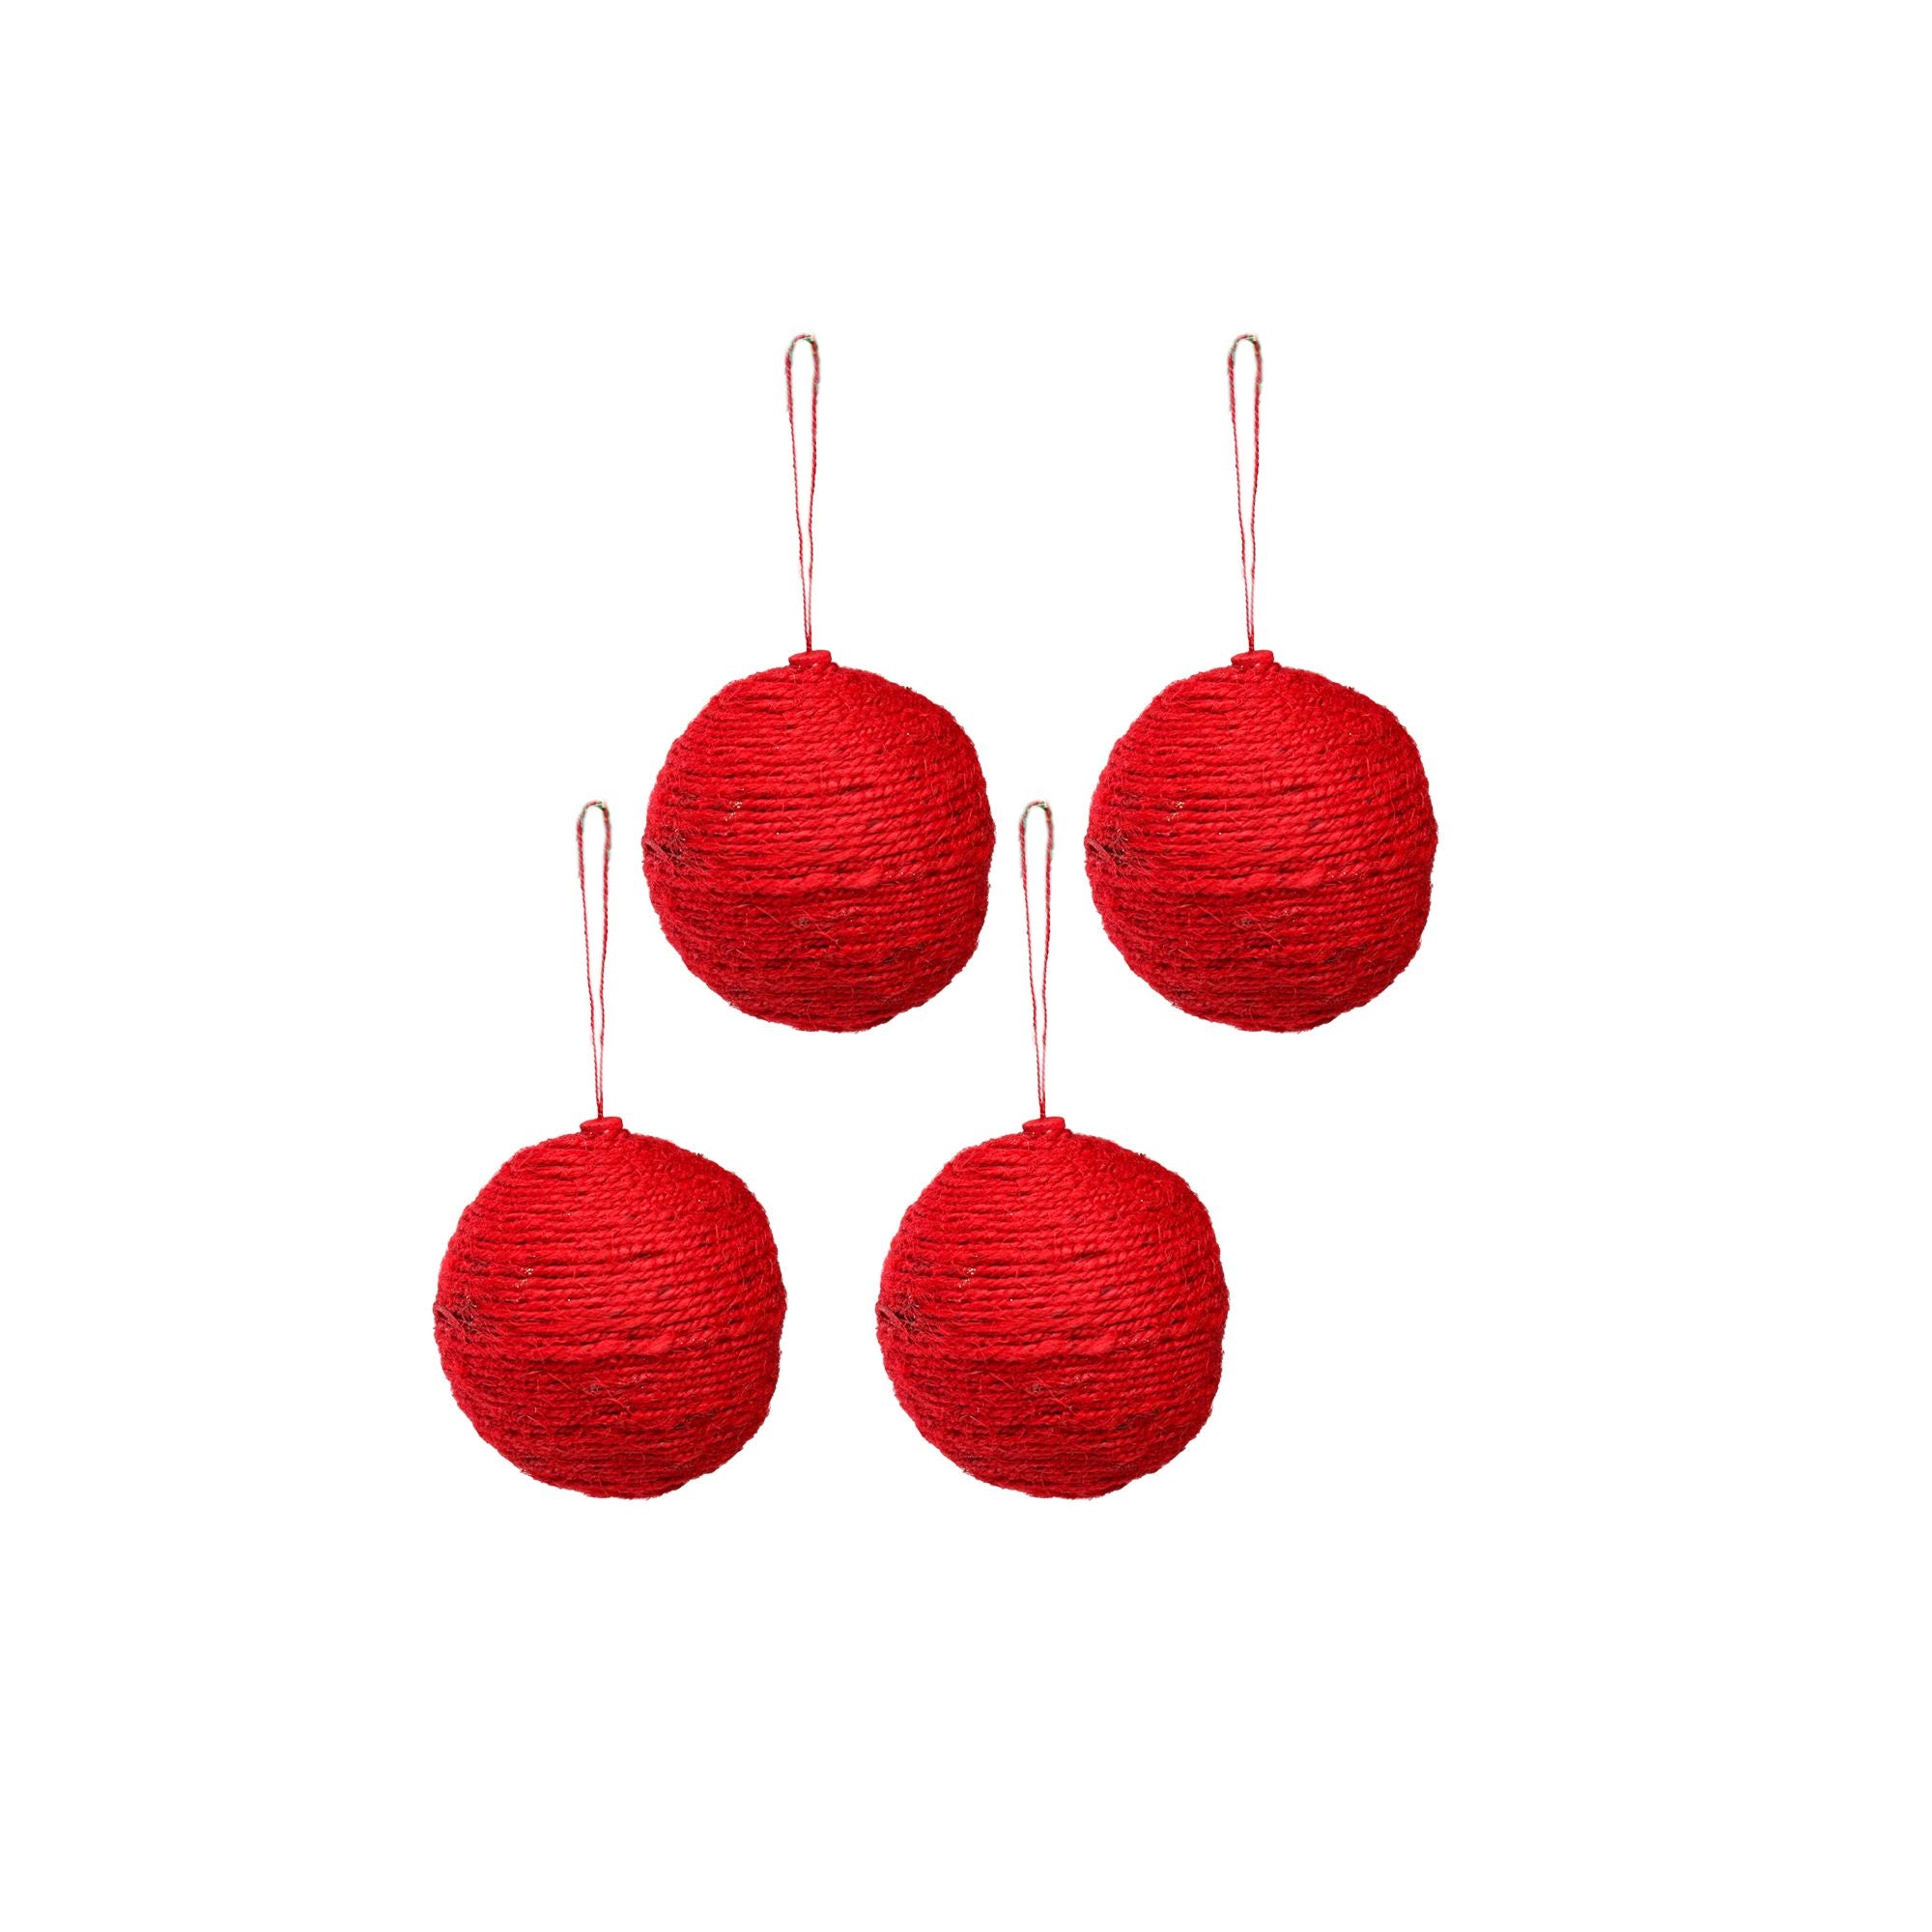 Handmade Christmas Ornaments - Jute Baubles, 50mm, Red, 4pc